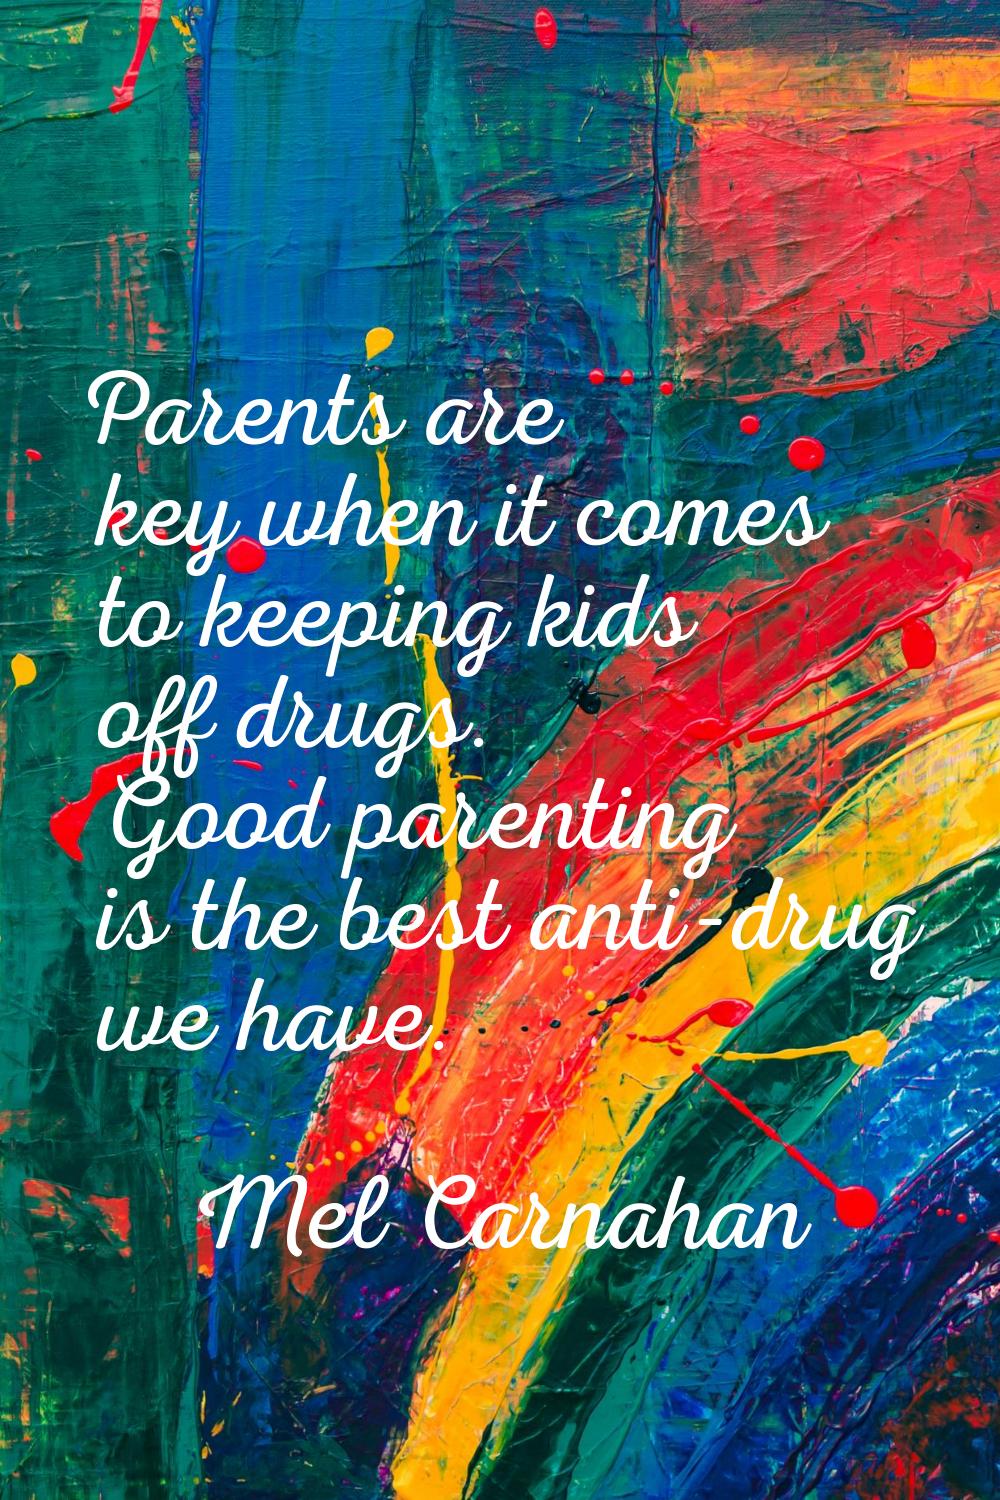 Parents are key when it comes to keeping kids off drugs. Good parenting is the best anti-drug we ha